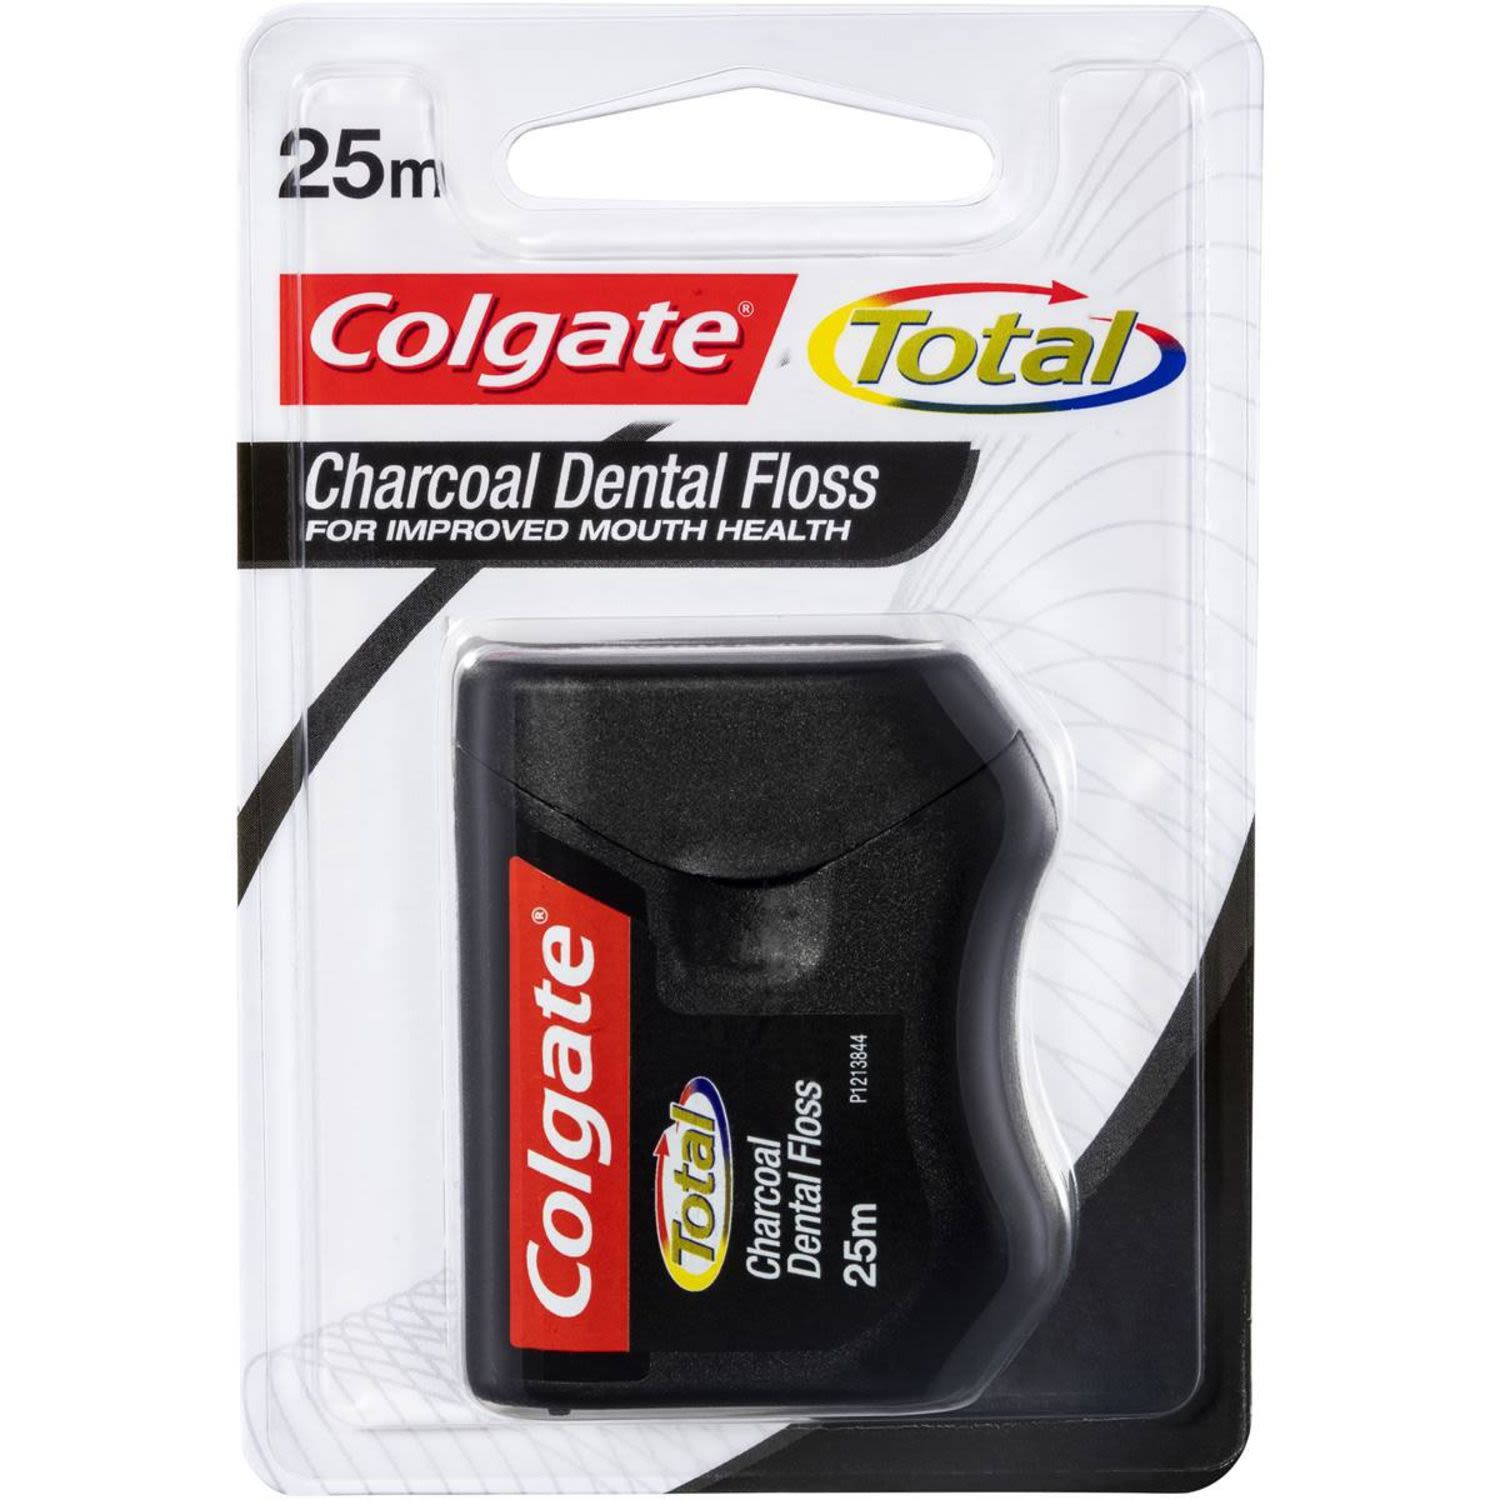 Colgate Total Charcoal Oral Care Dental Floss 25m, 1 Each